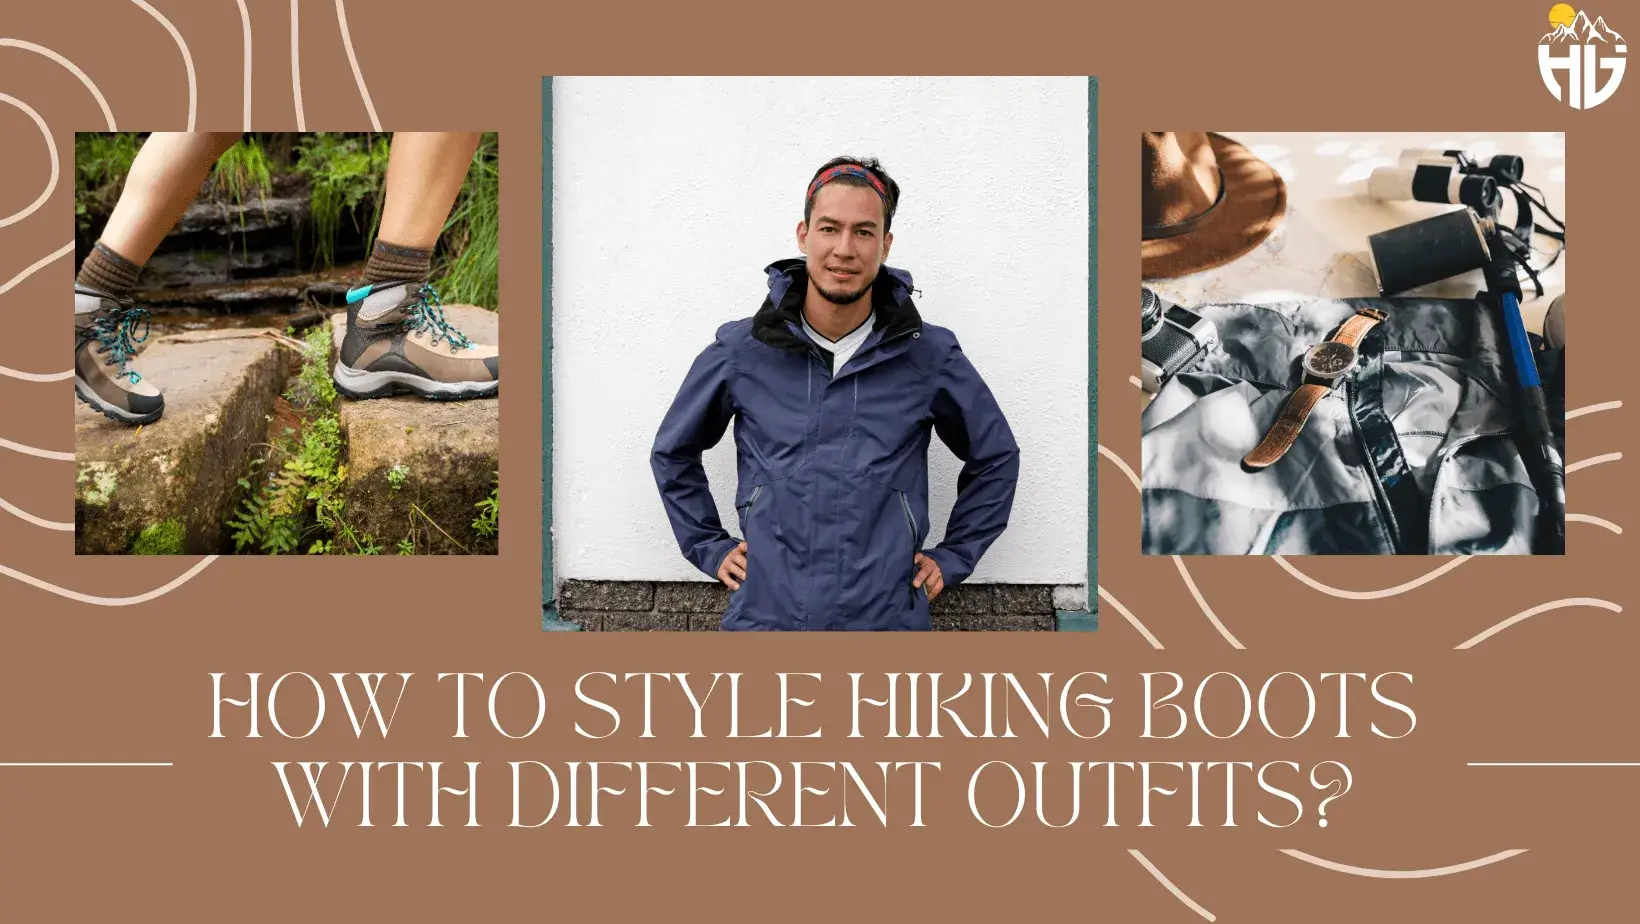 How to Style Hiking Boots With Different Outfits?